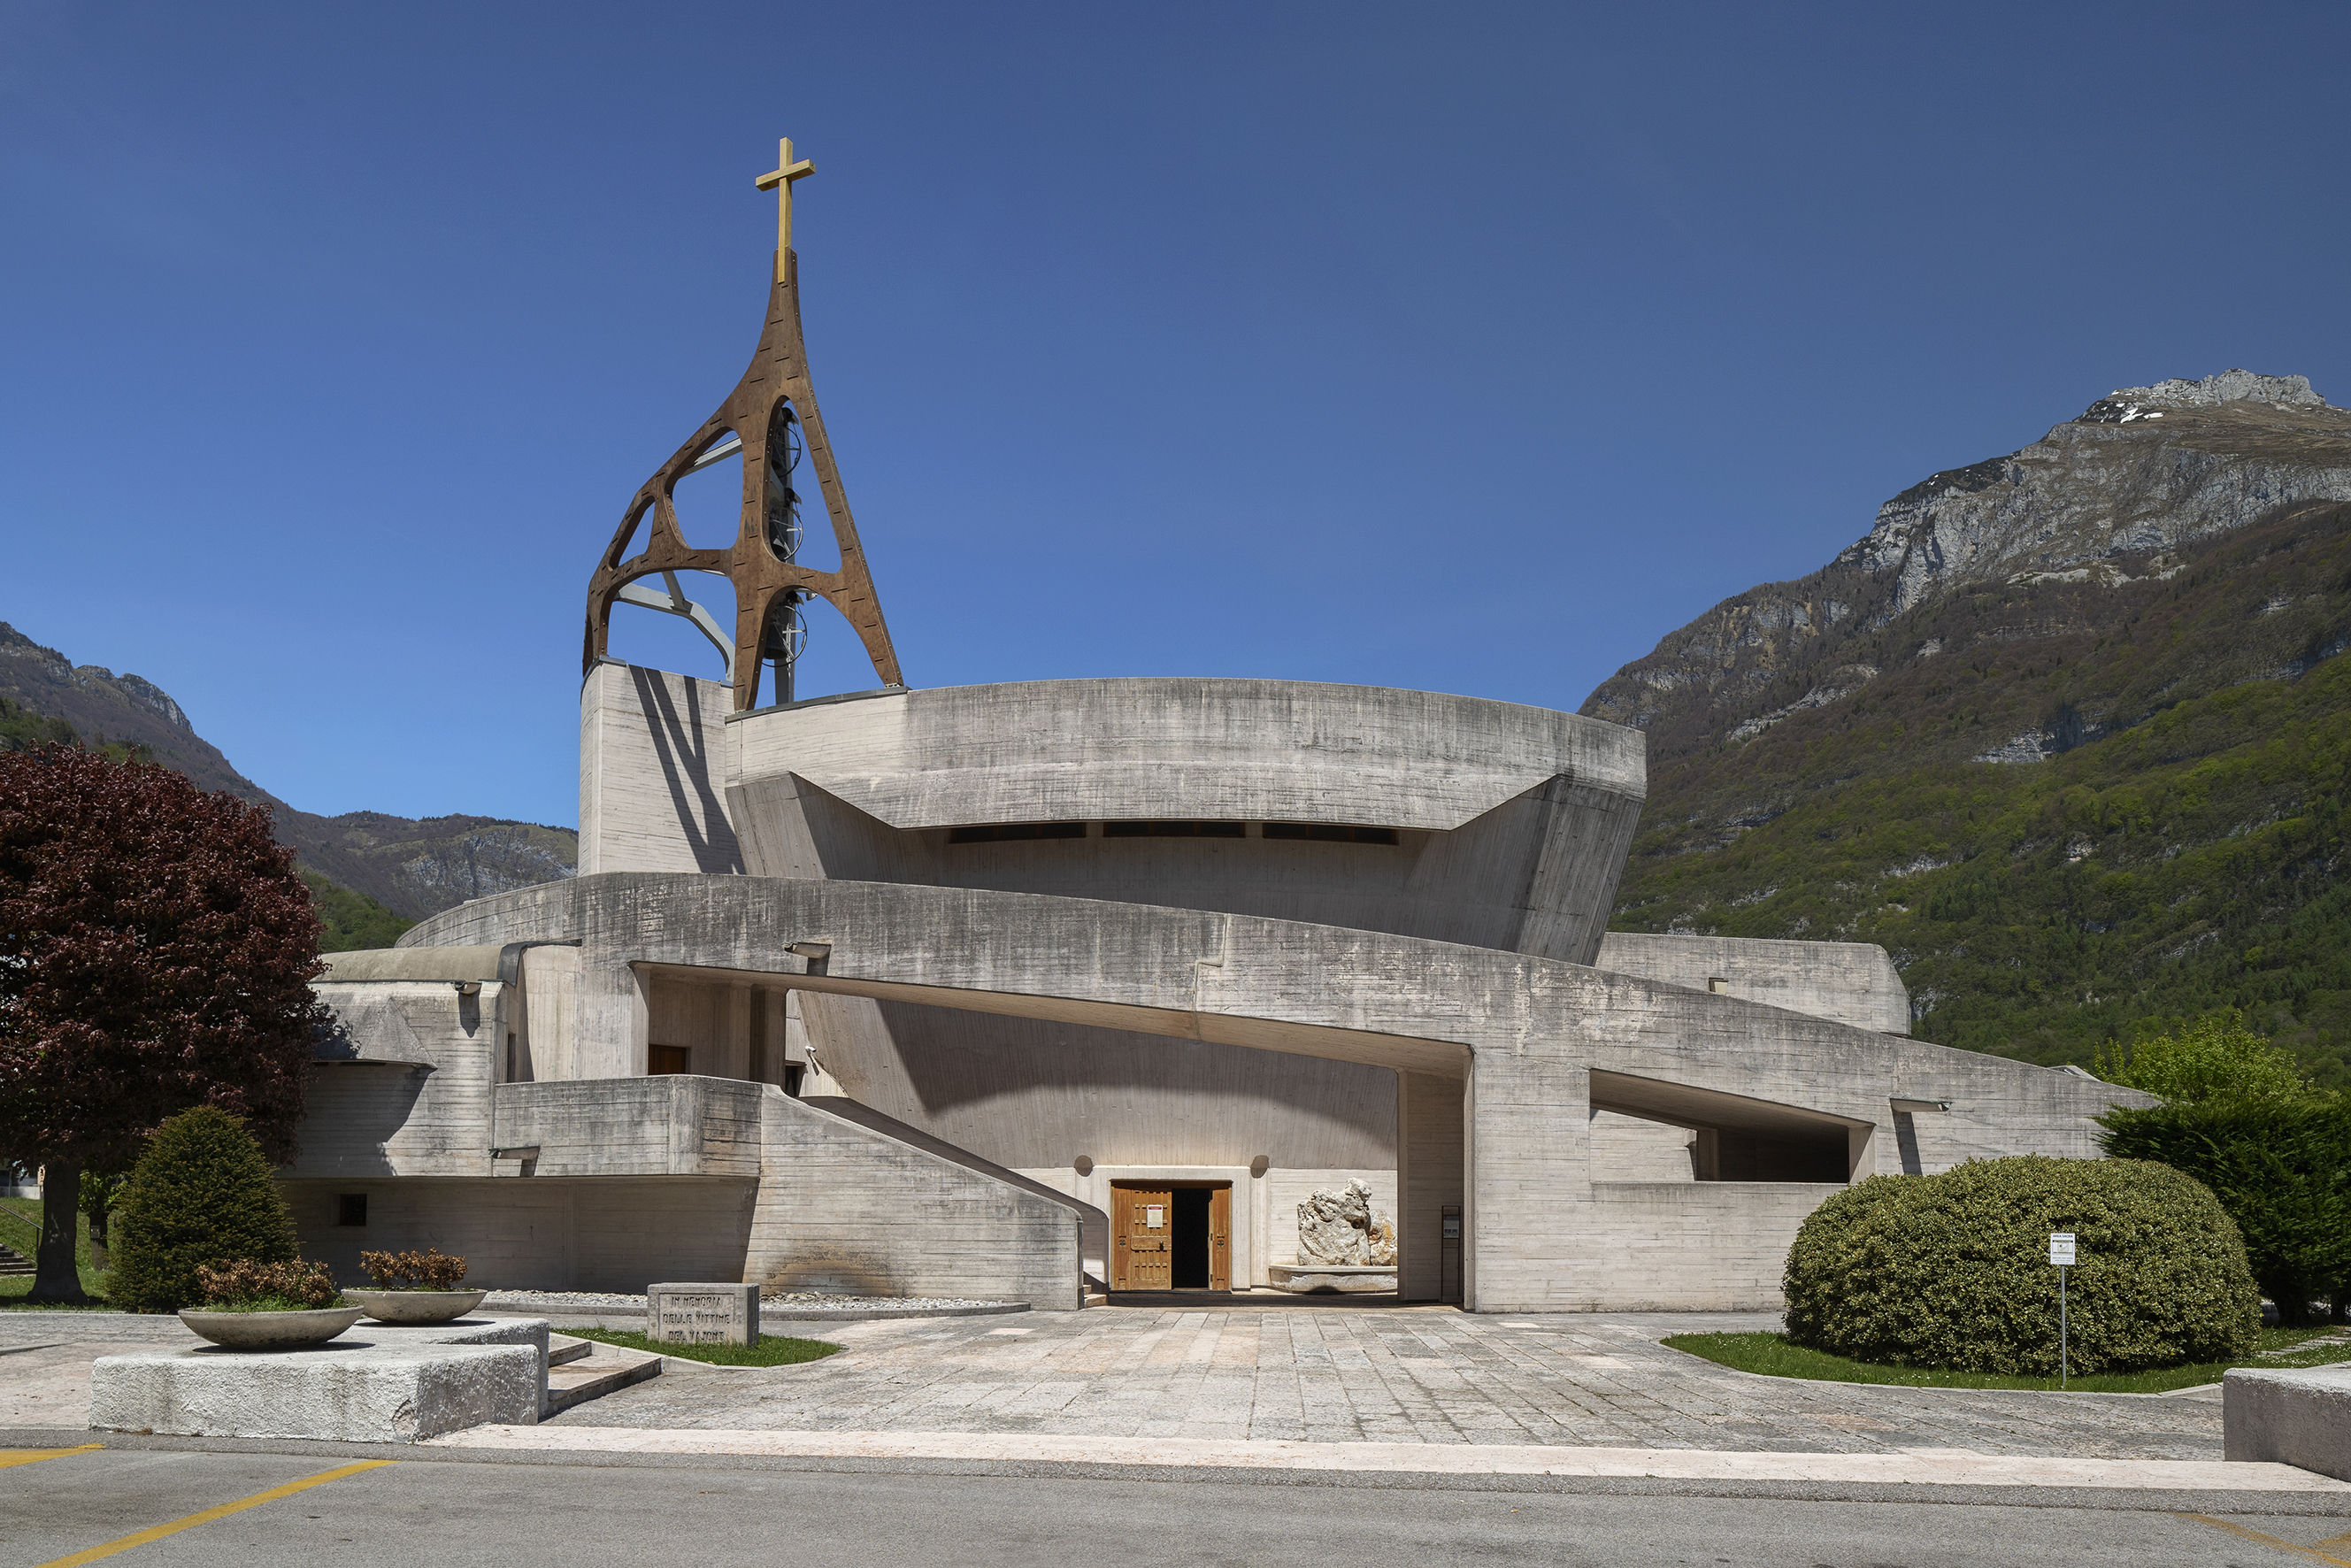 Saint Mary Immaculate Church, Longarone, by Giovanni Michelucci, 1966–82 | Image credit: Roberto Conte and Stefano Perego / Fuel